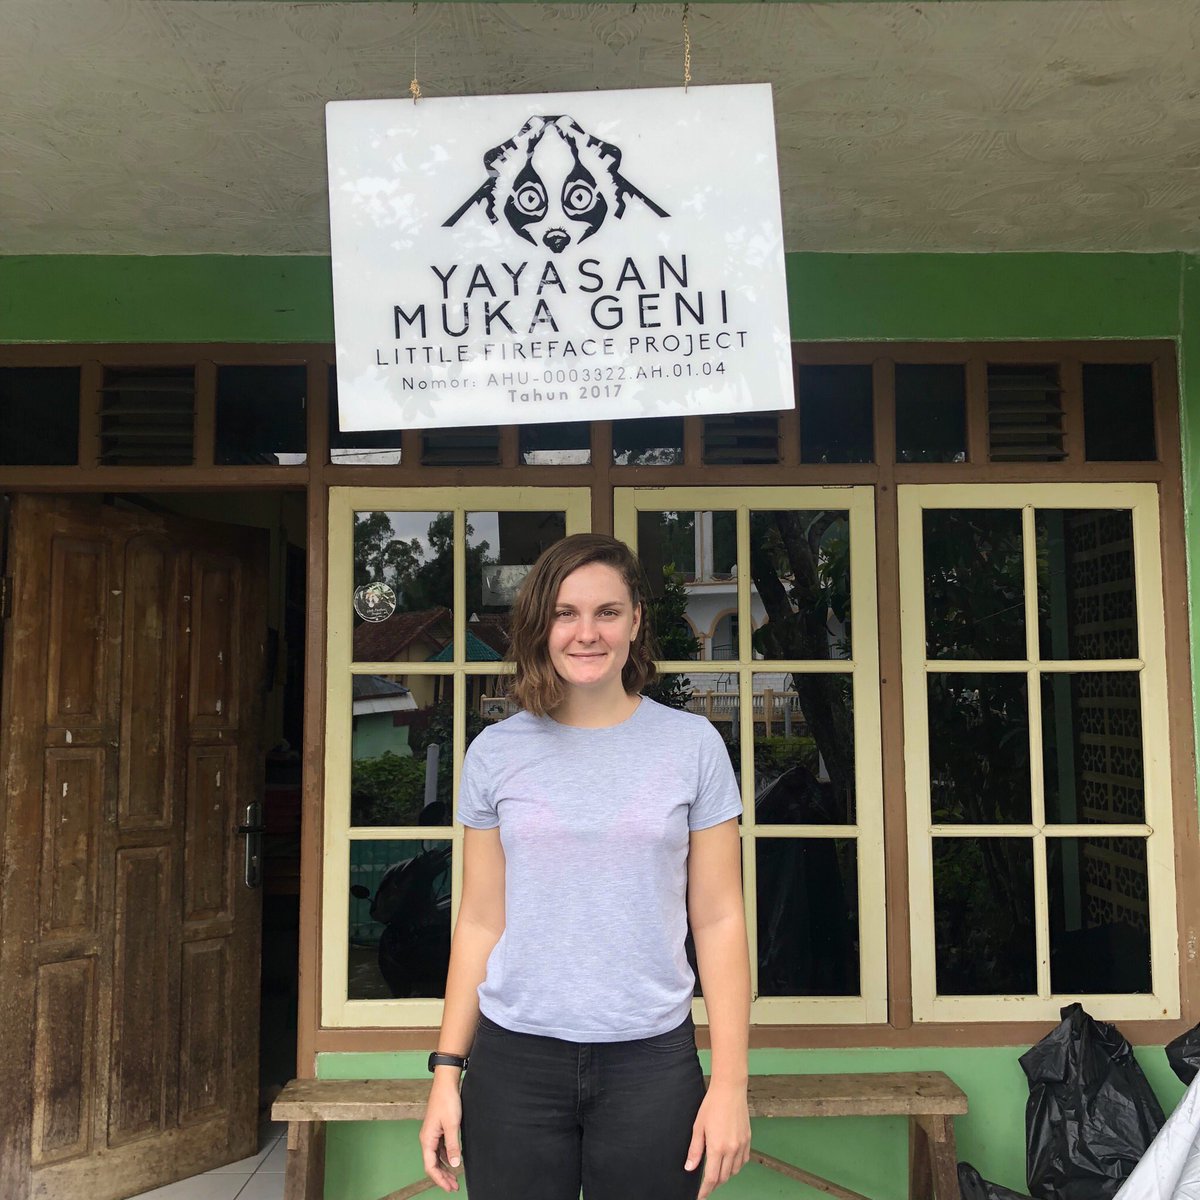 So stoked to be apart of an amazing project and learning experience! Excited for the next 6 months shacking it up in Cipaganti Village in West Java, Indonesia #conservation #researchabroad @littlefireface